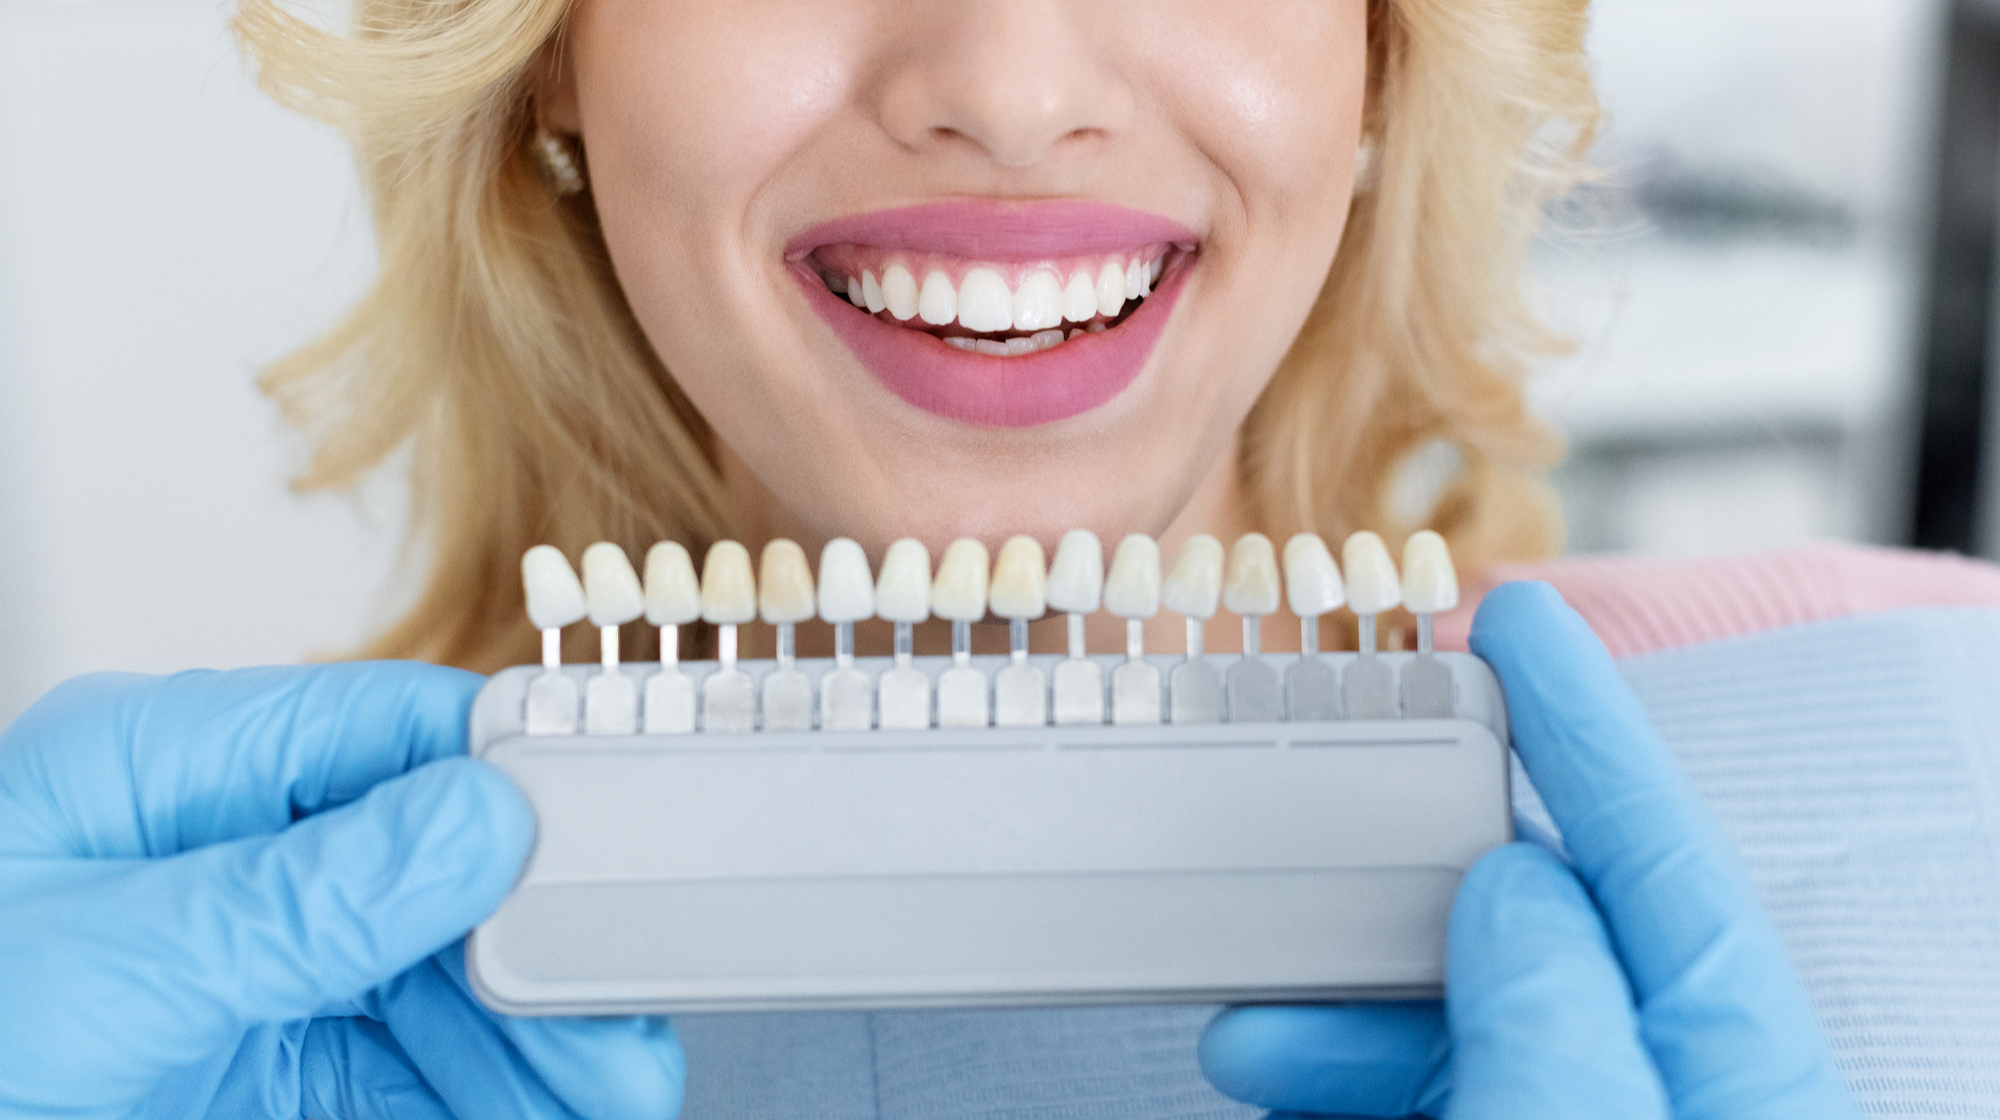 How to safely whiten teeth at home?  Methods and risks